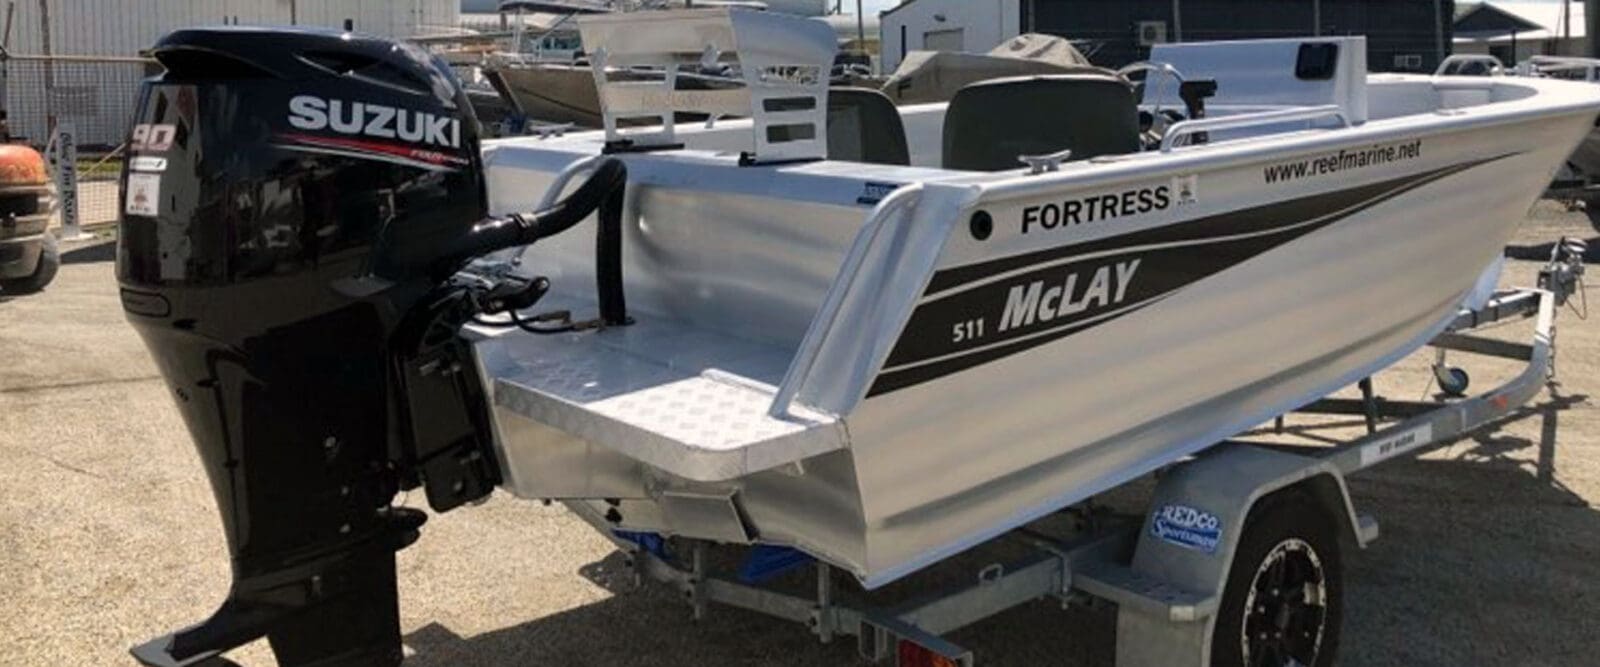 McLay 511 Fortress Side Console